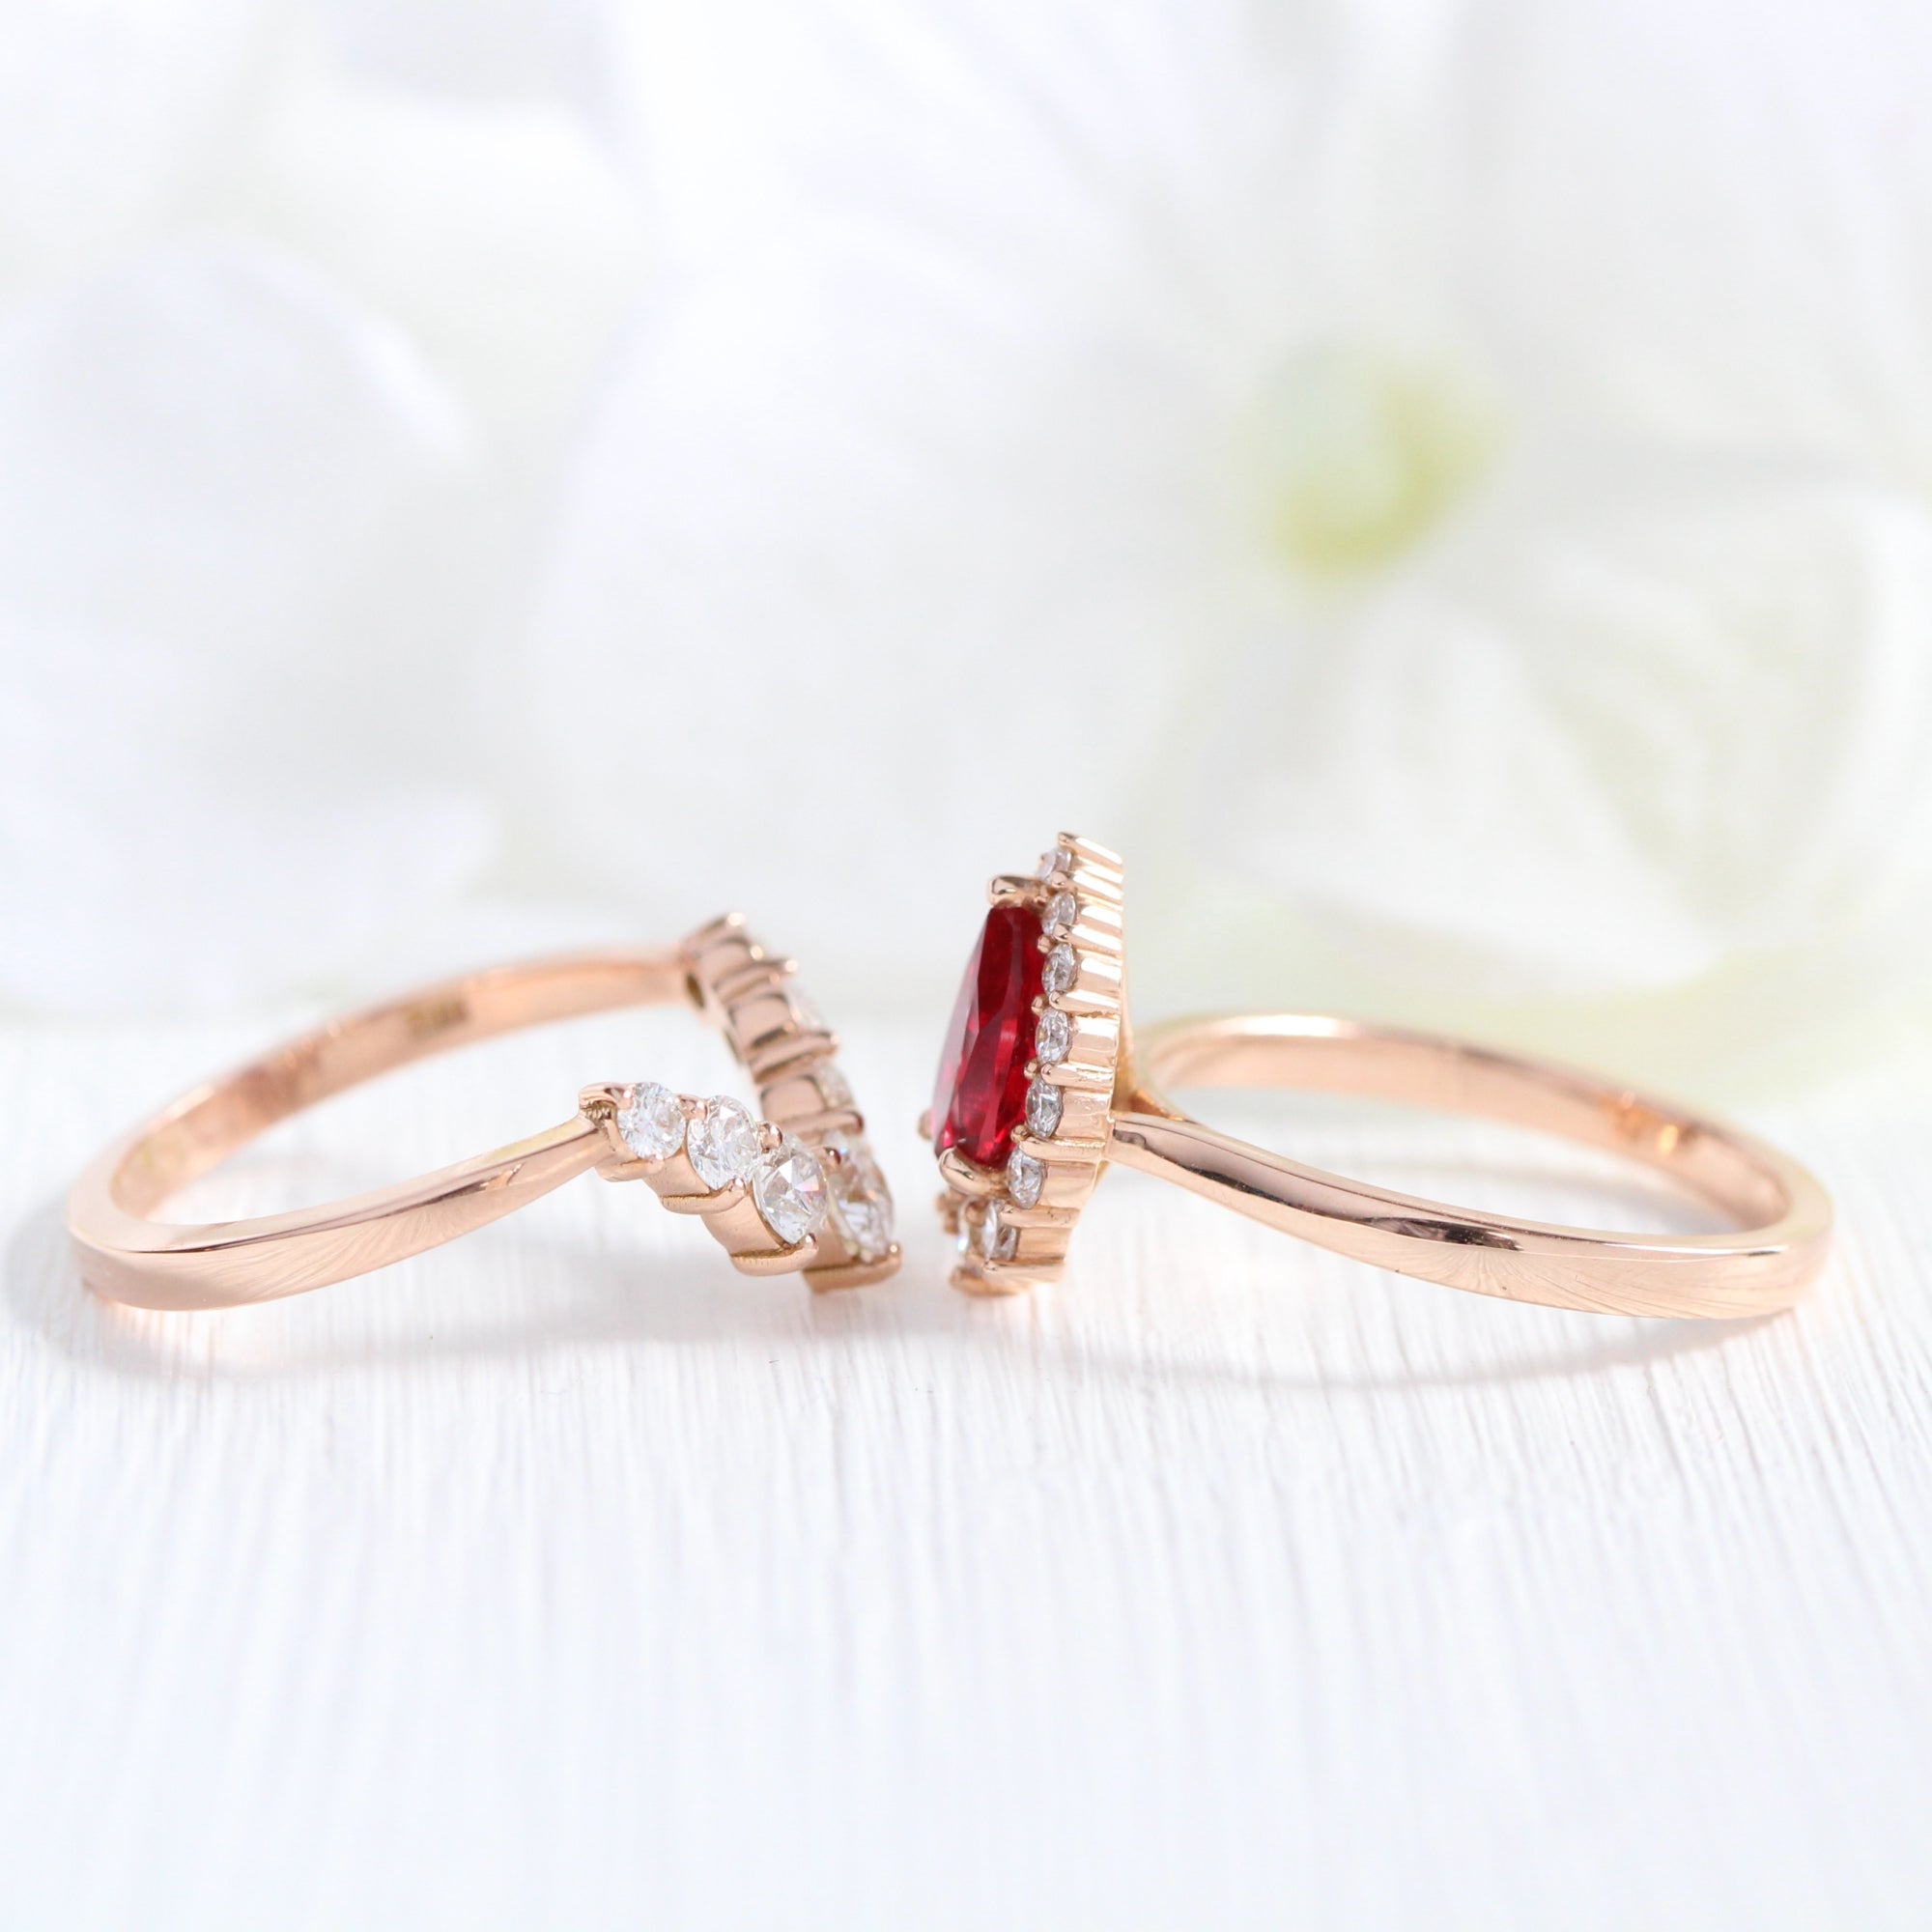 pear ruby ring stack rose gold curved diamond wedding band set la more design jewelry